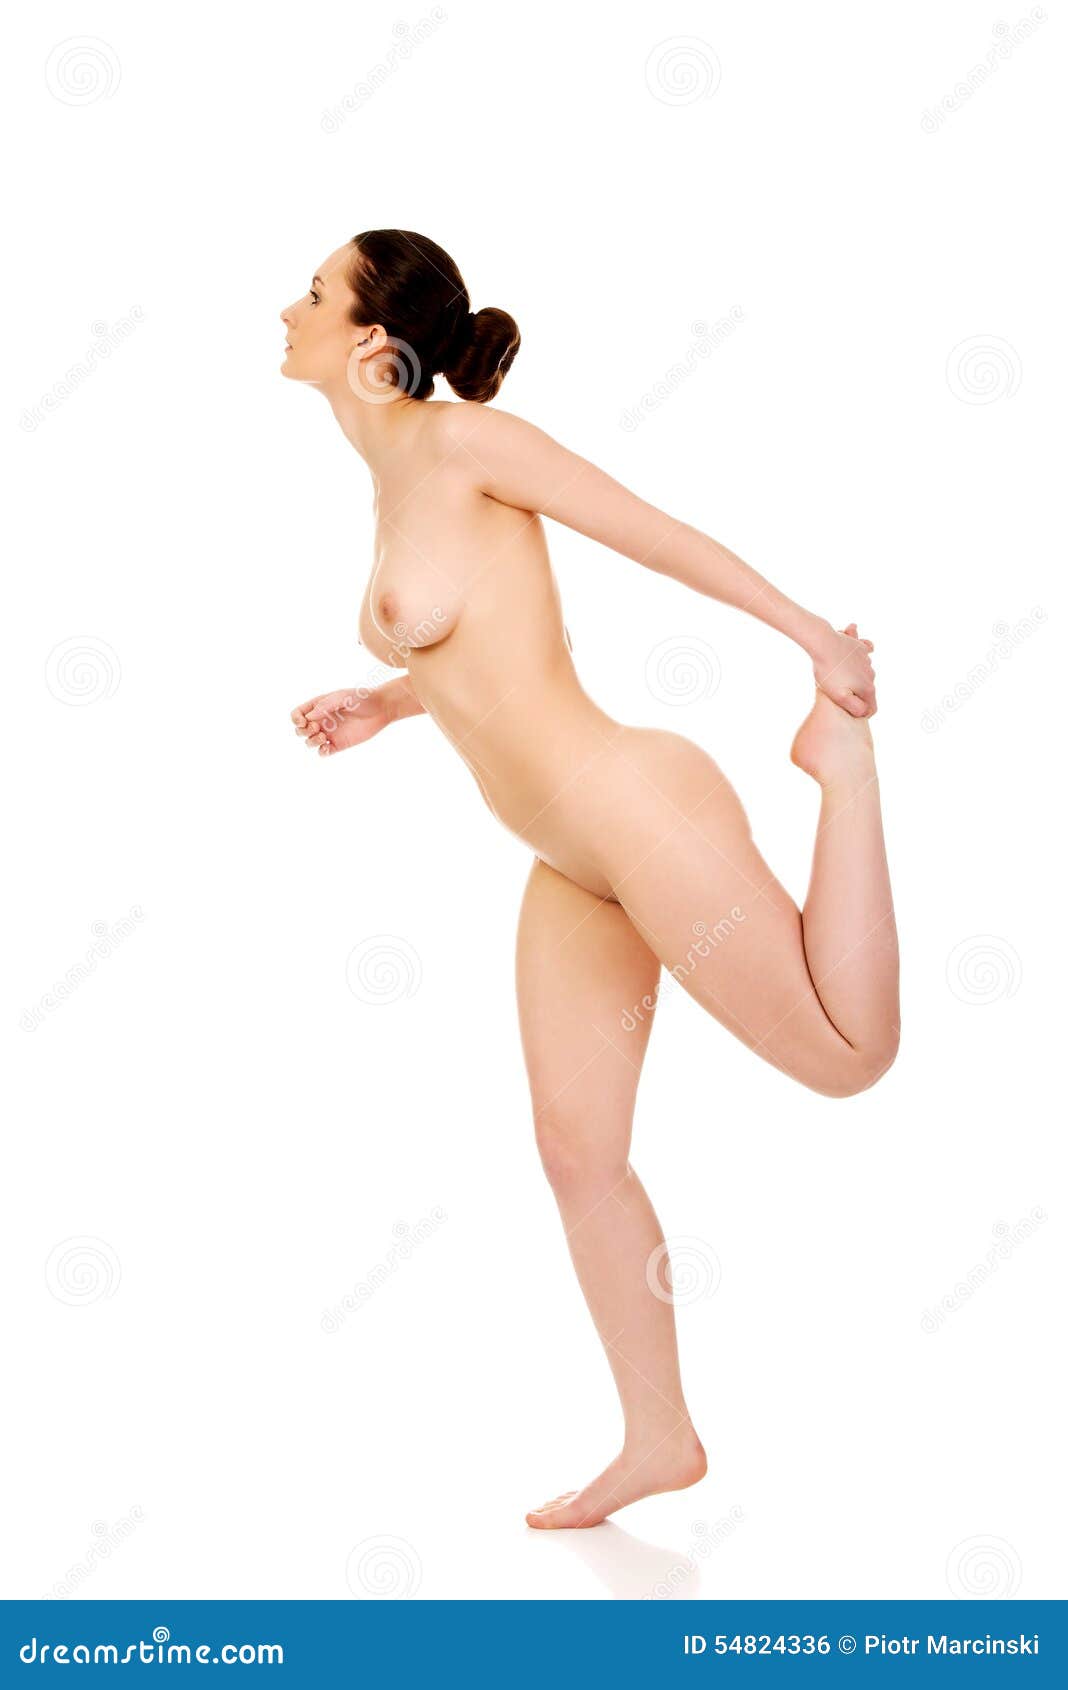 Nude woman stretching. stock photo. Image of practice - 54824336